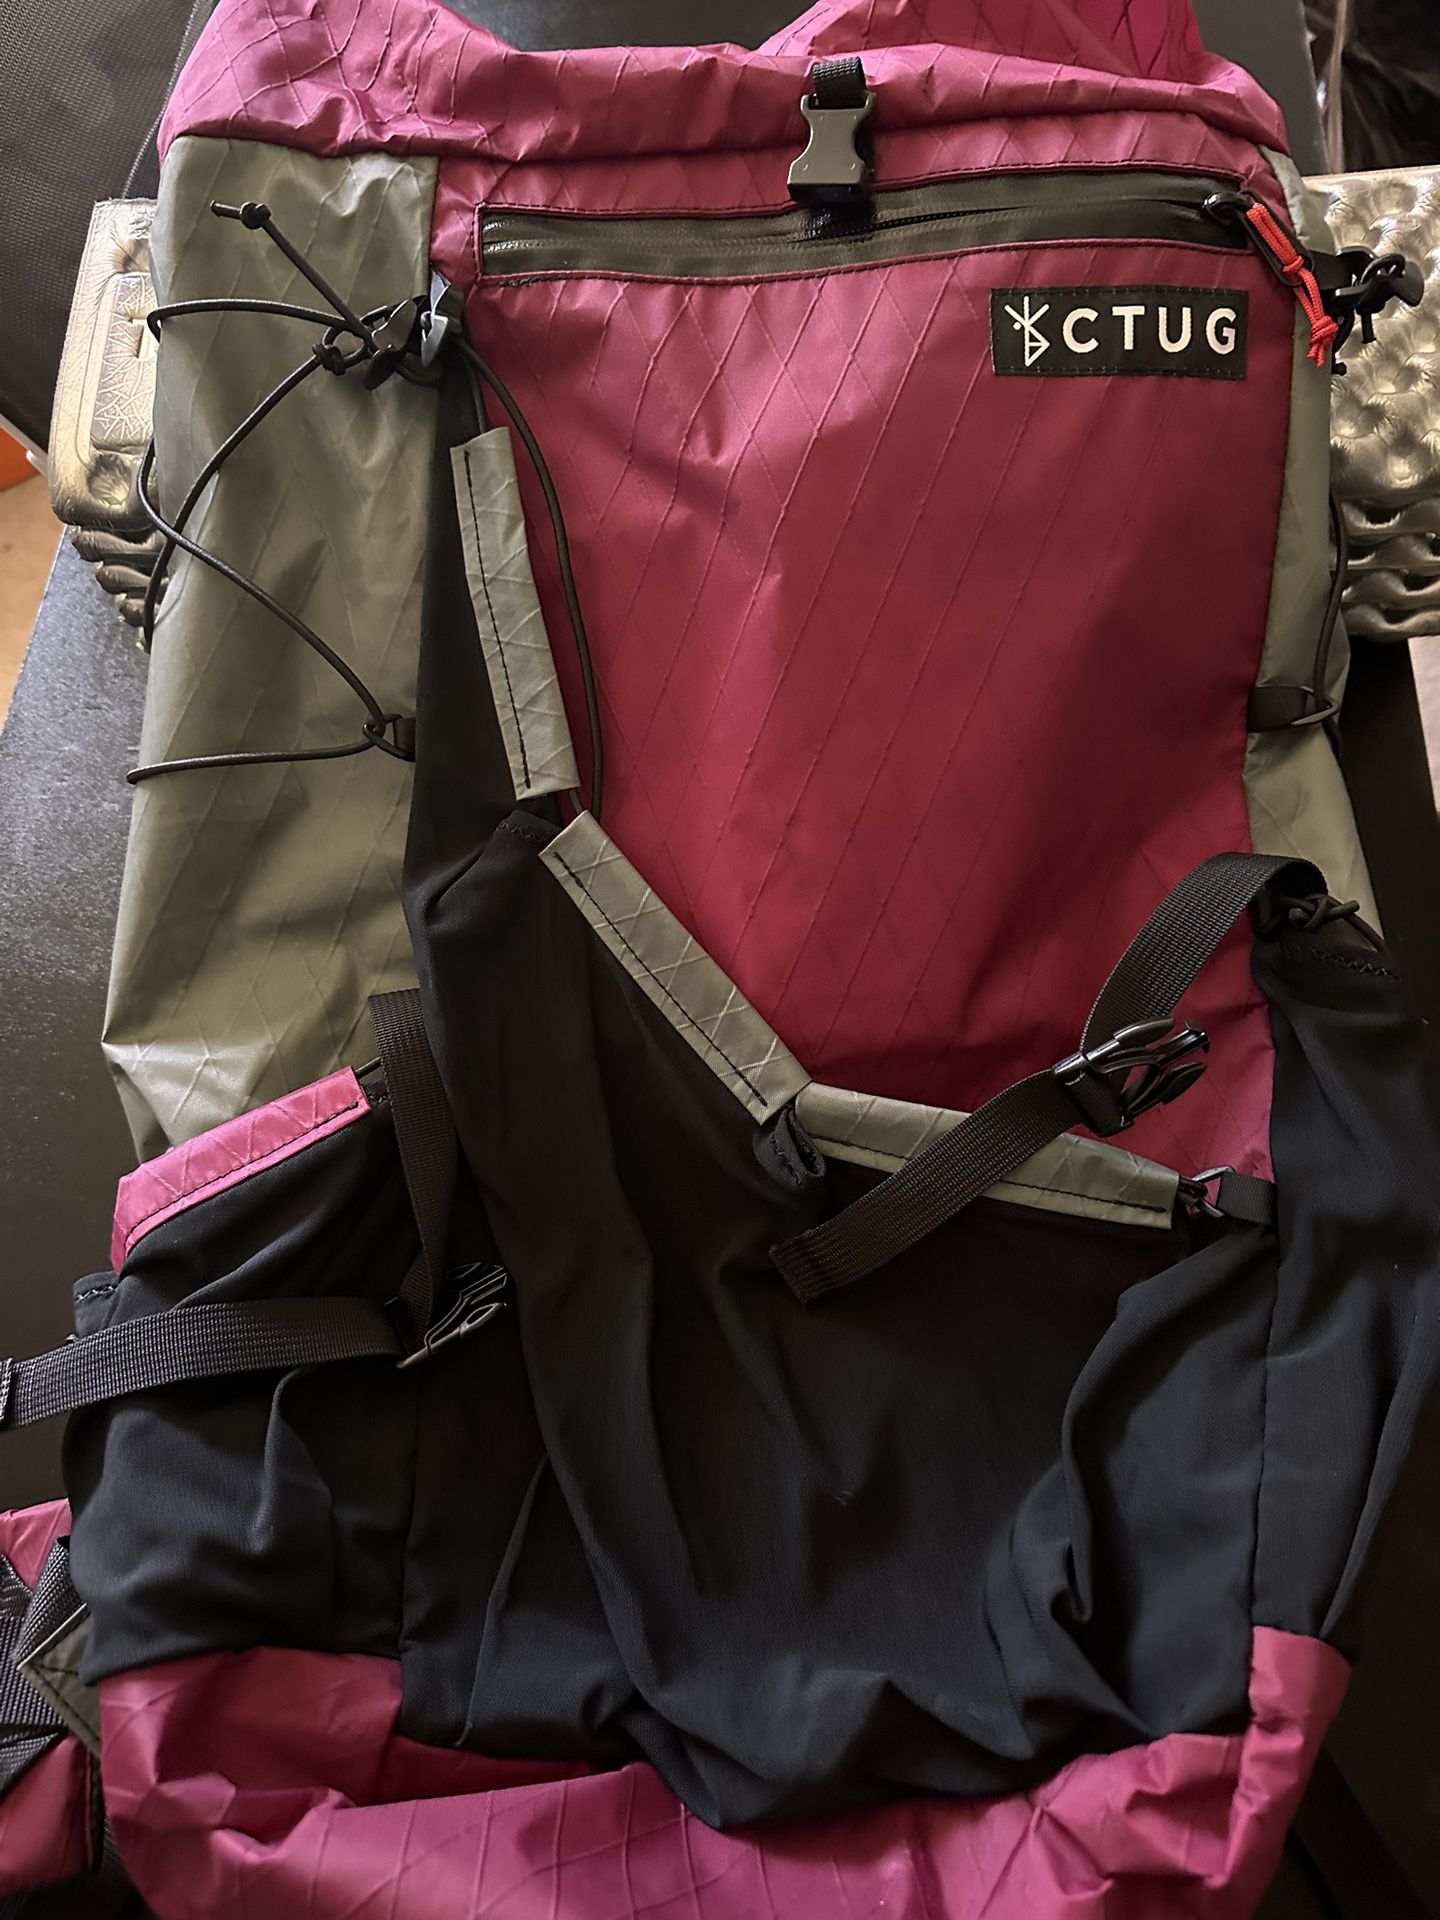 CTUG-25 DAY PACK - Large 